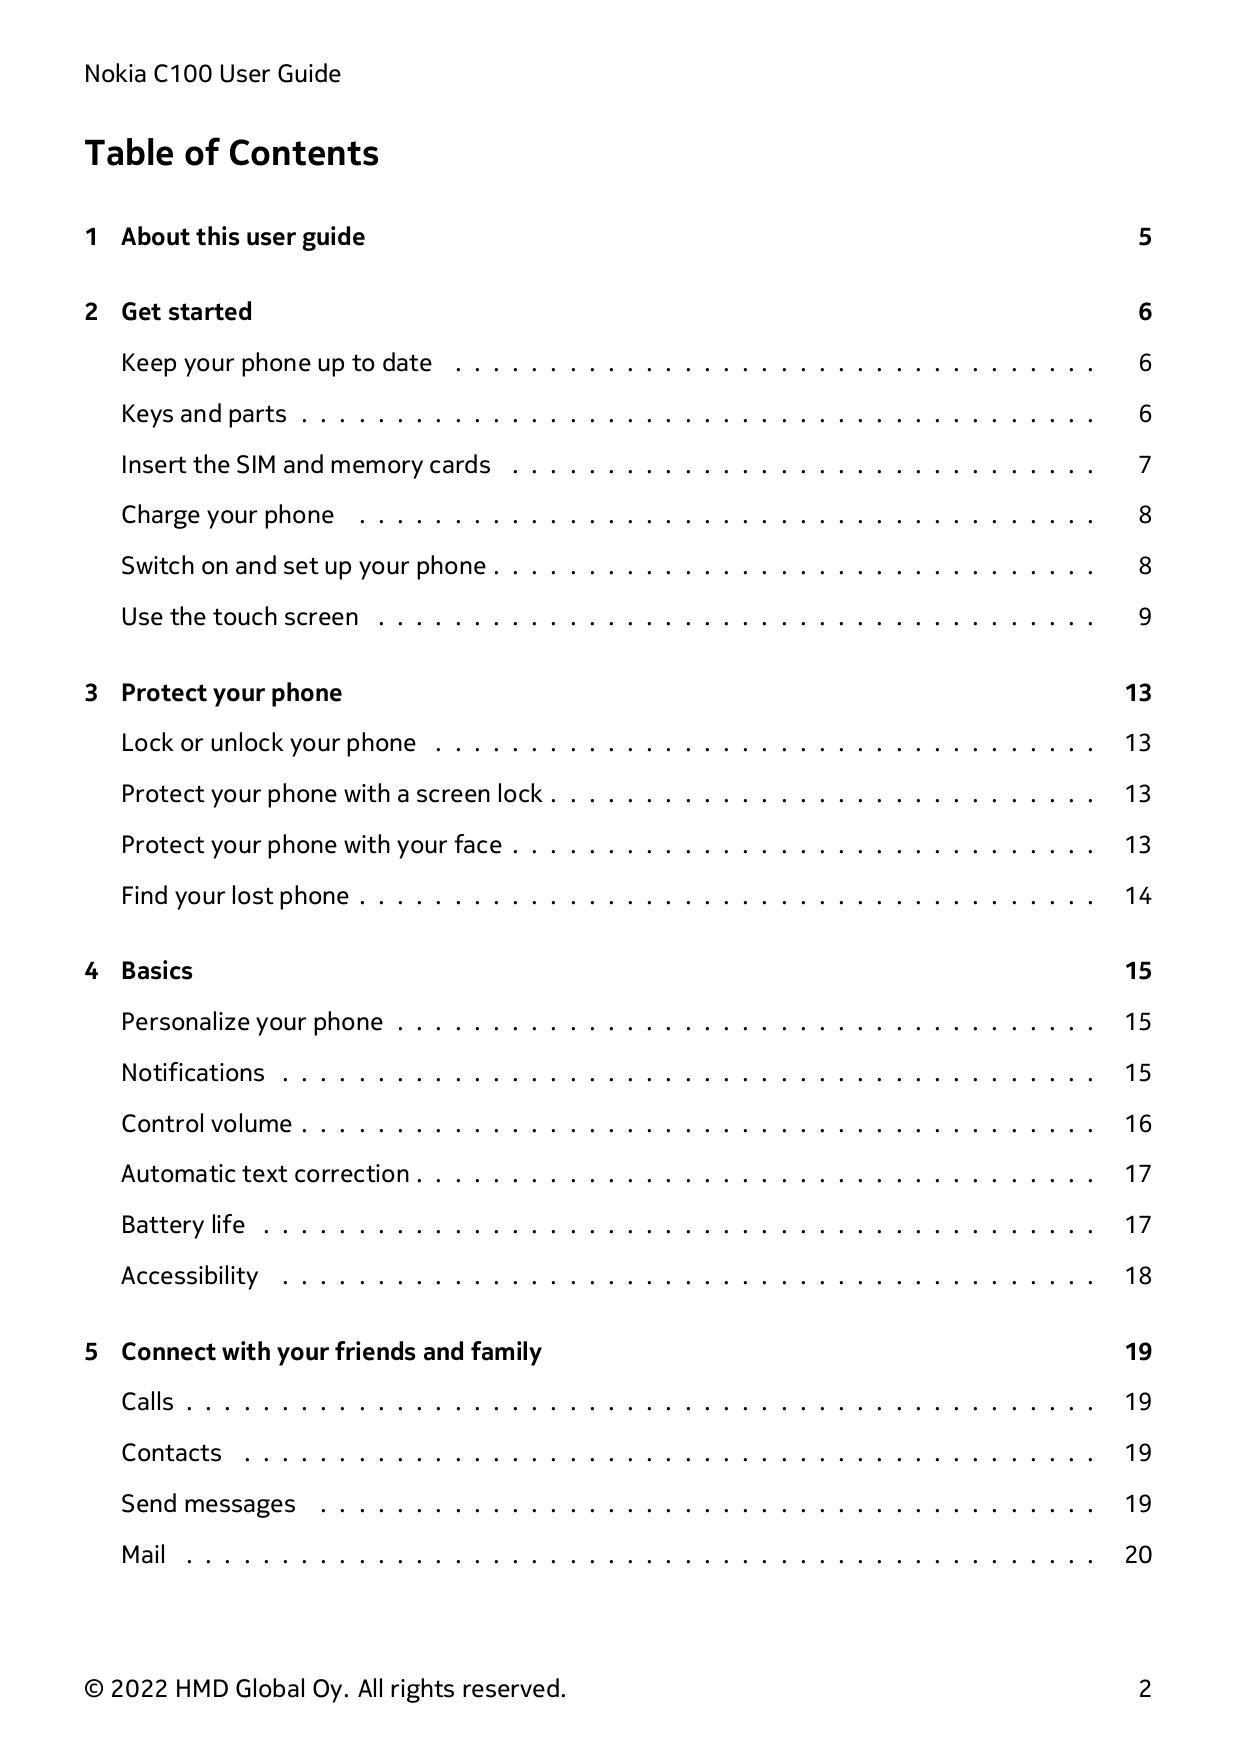 Nokia C100 User GuideTable of Contents1 About this user guide52 Get started6Keep your phone up to date . . . . . . . . . . . . .